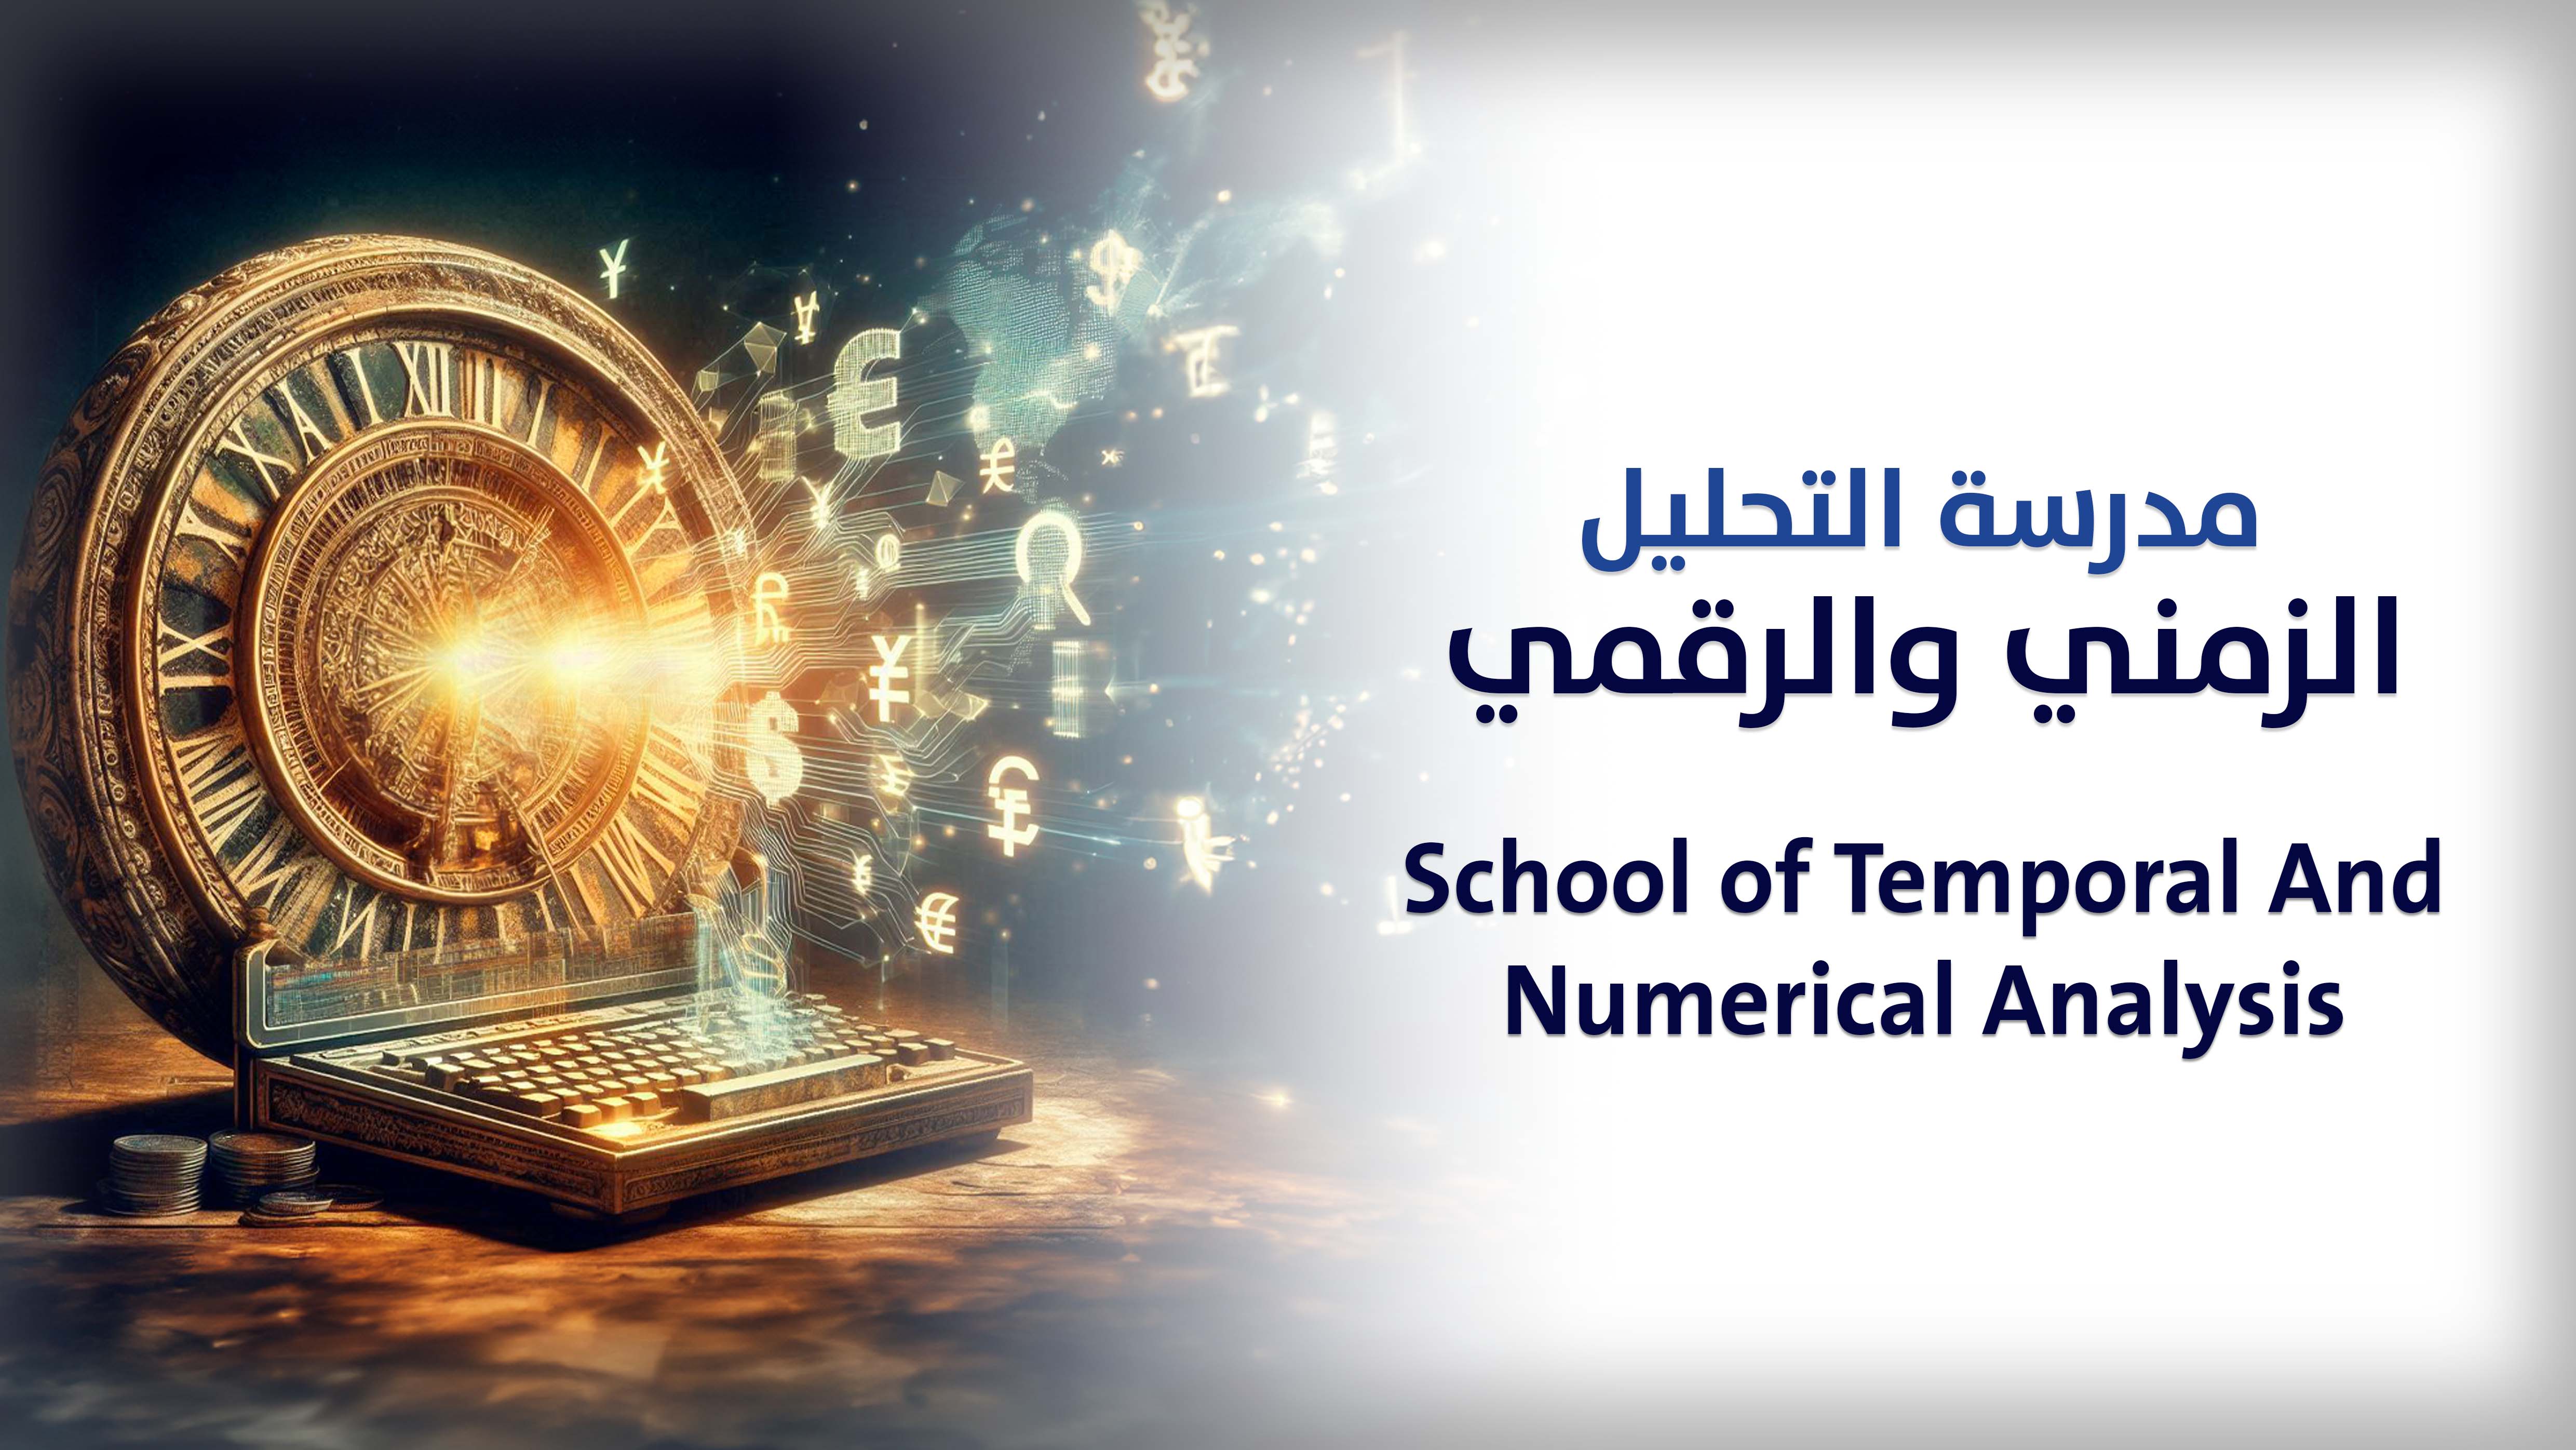 School of Temporal And Numerical Analysis